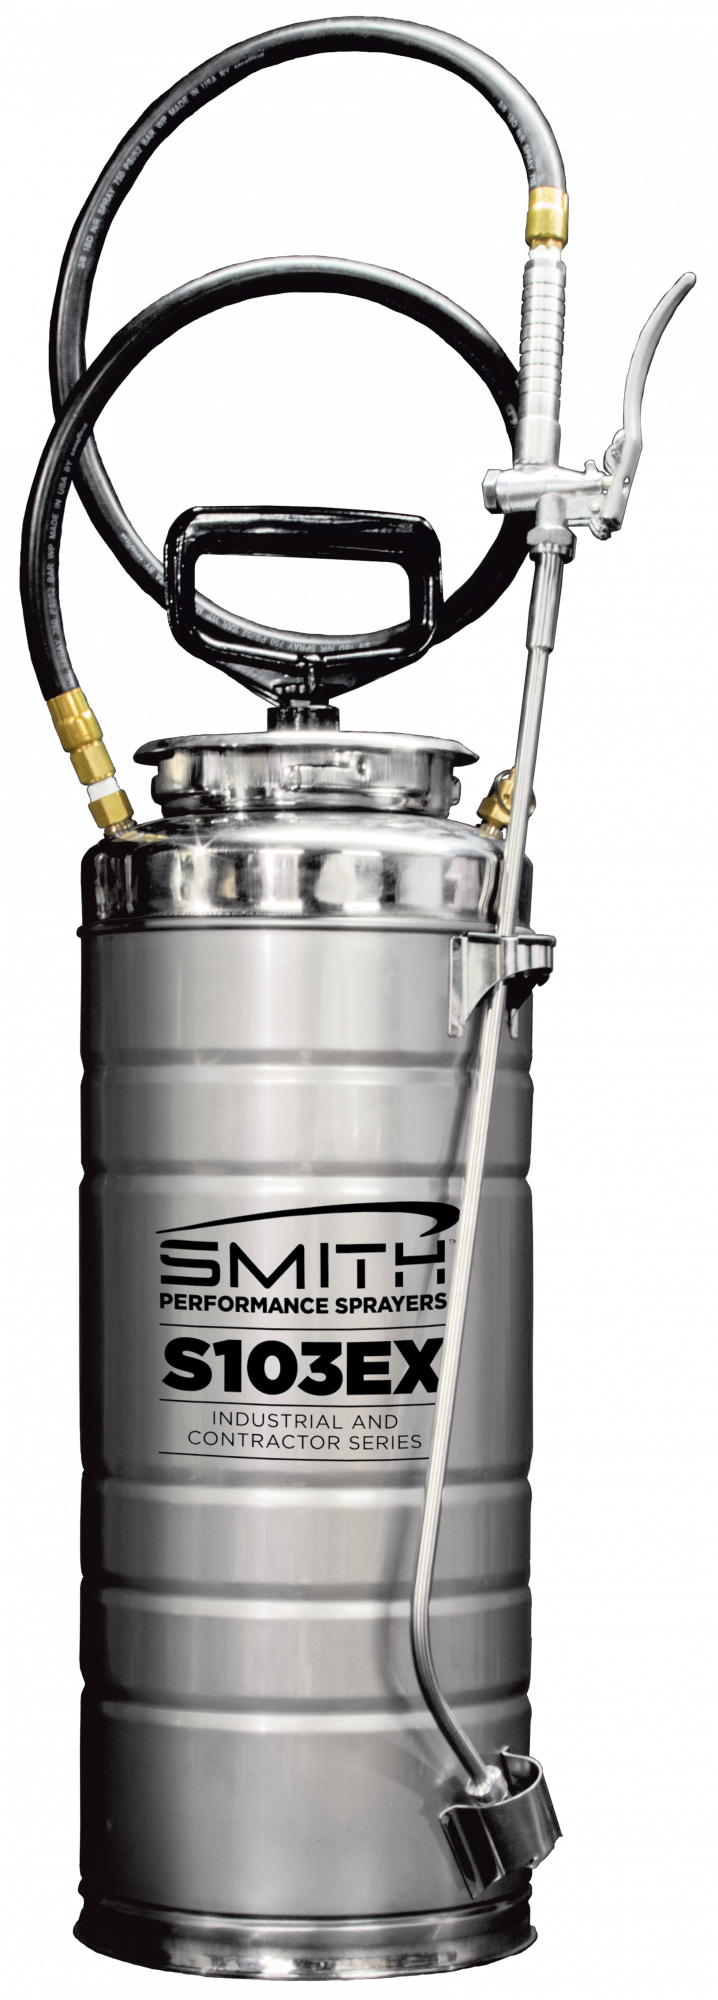 Smith Performance&trade; S103EX Stainless Steel Concrete Sprayer with Viton® Extreme Seals 190468